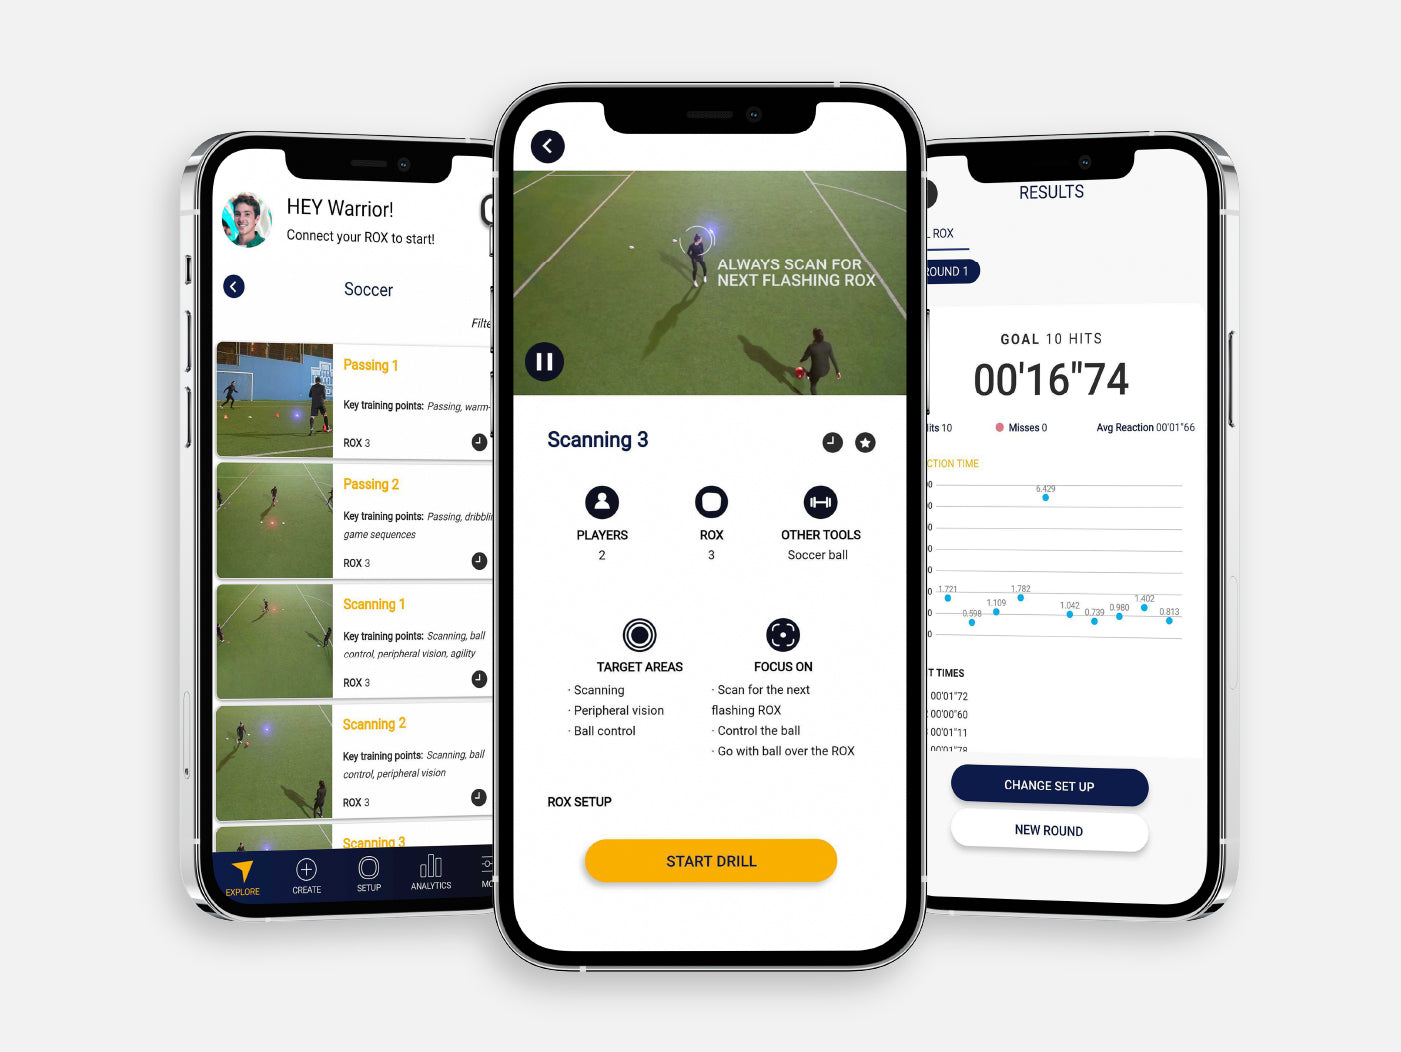 Three smartphones display different features of the A-Champs ROXPro soccer training app. On the left, a menu lists various soccer drills. The middle screen prompts to start a "Scanning 3" drill, highlighting player count and training areas. The right phone shows session results with hit goals, time, and reaction analytics, offering options for setup changes or new rounds. The interface is sleek and designed for interactive soccer training.